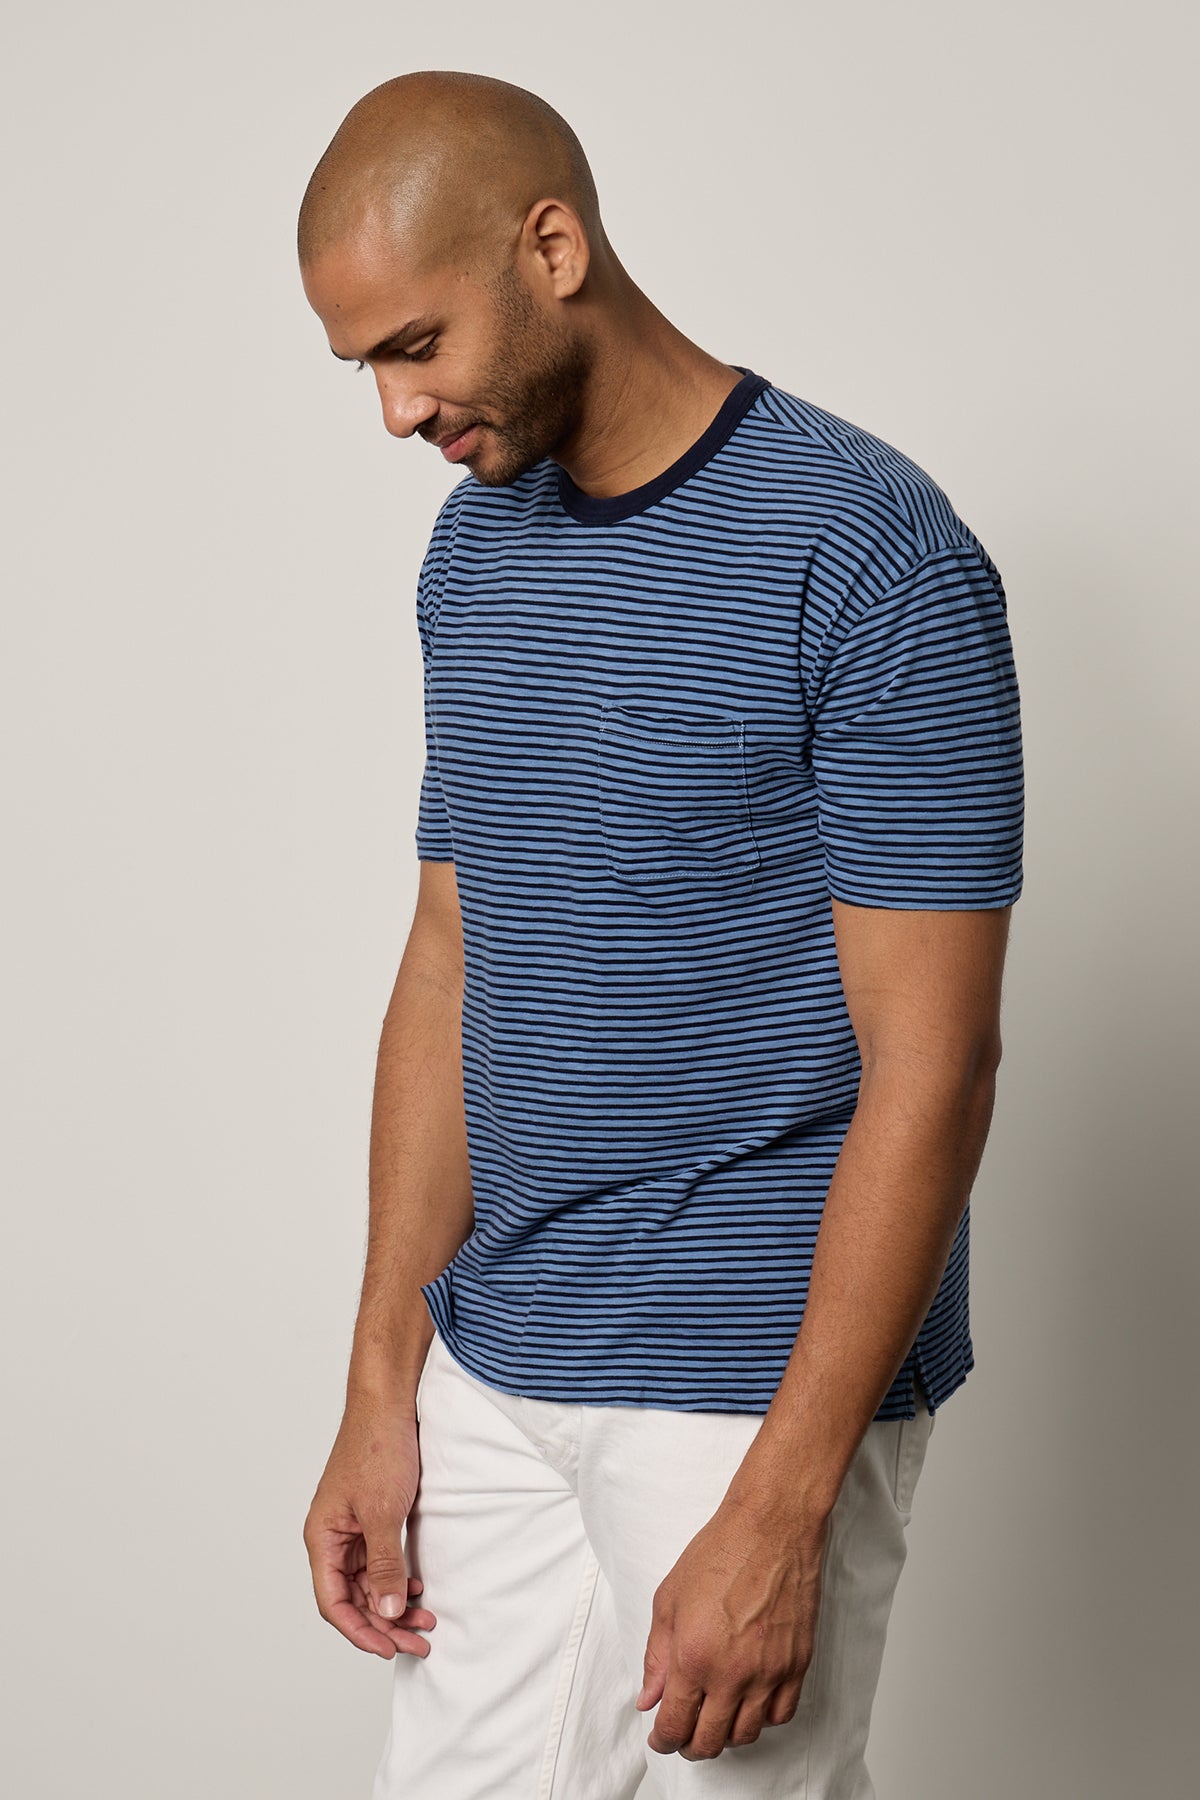 Jeremy Crew Neck Tee with medium and dark blue stripes, front pocket, paired with white denim front & side-26249324003521